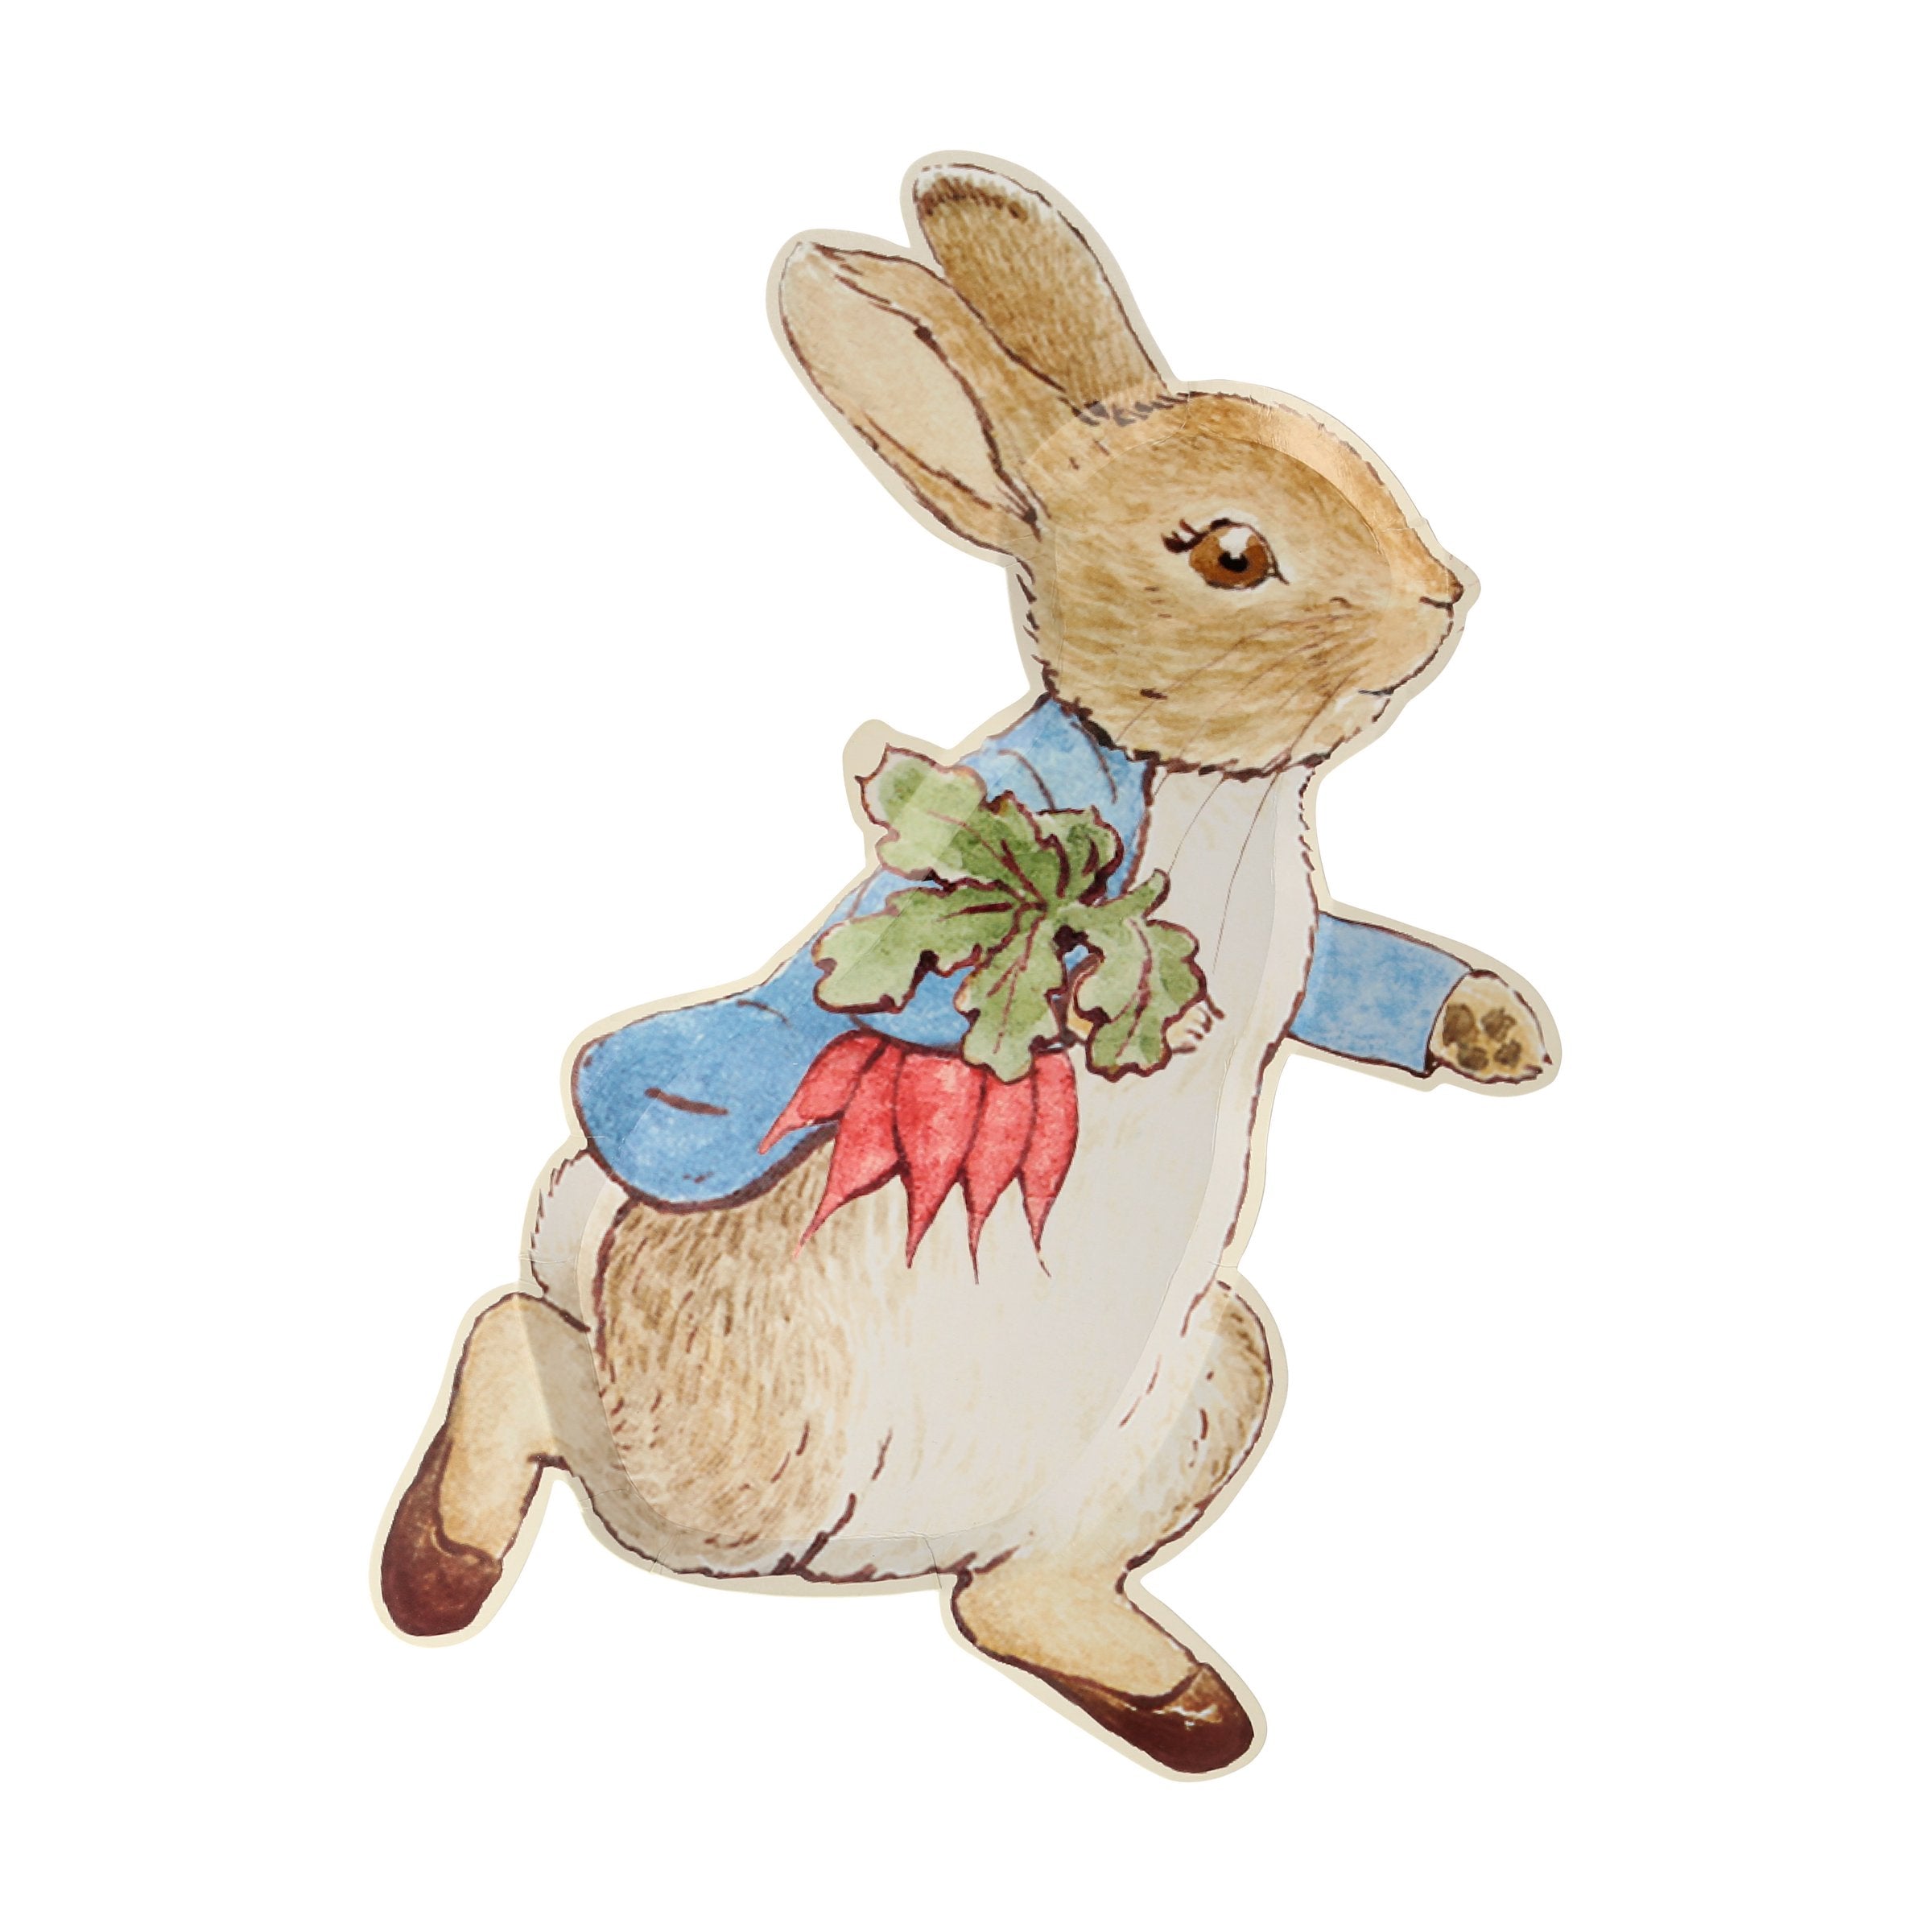 These plates are crafted from high quality paper, in the shape of Peter Rabbit clutching a handful of radishes.